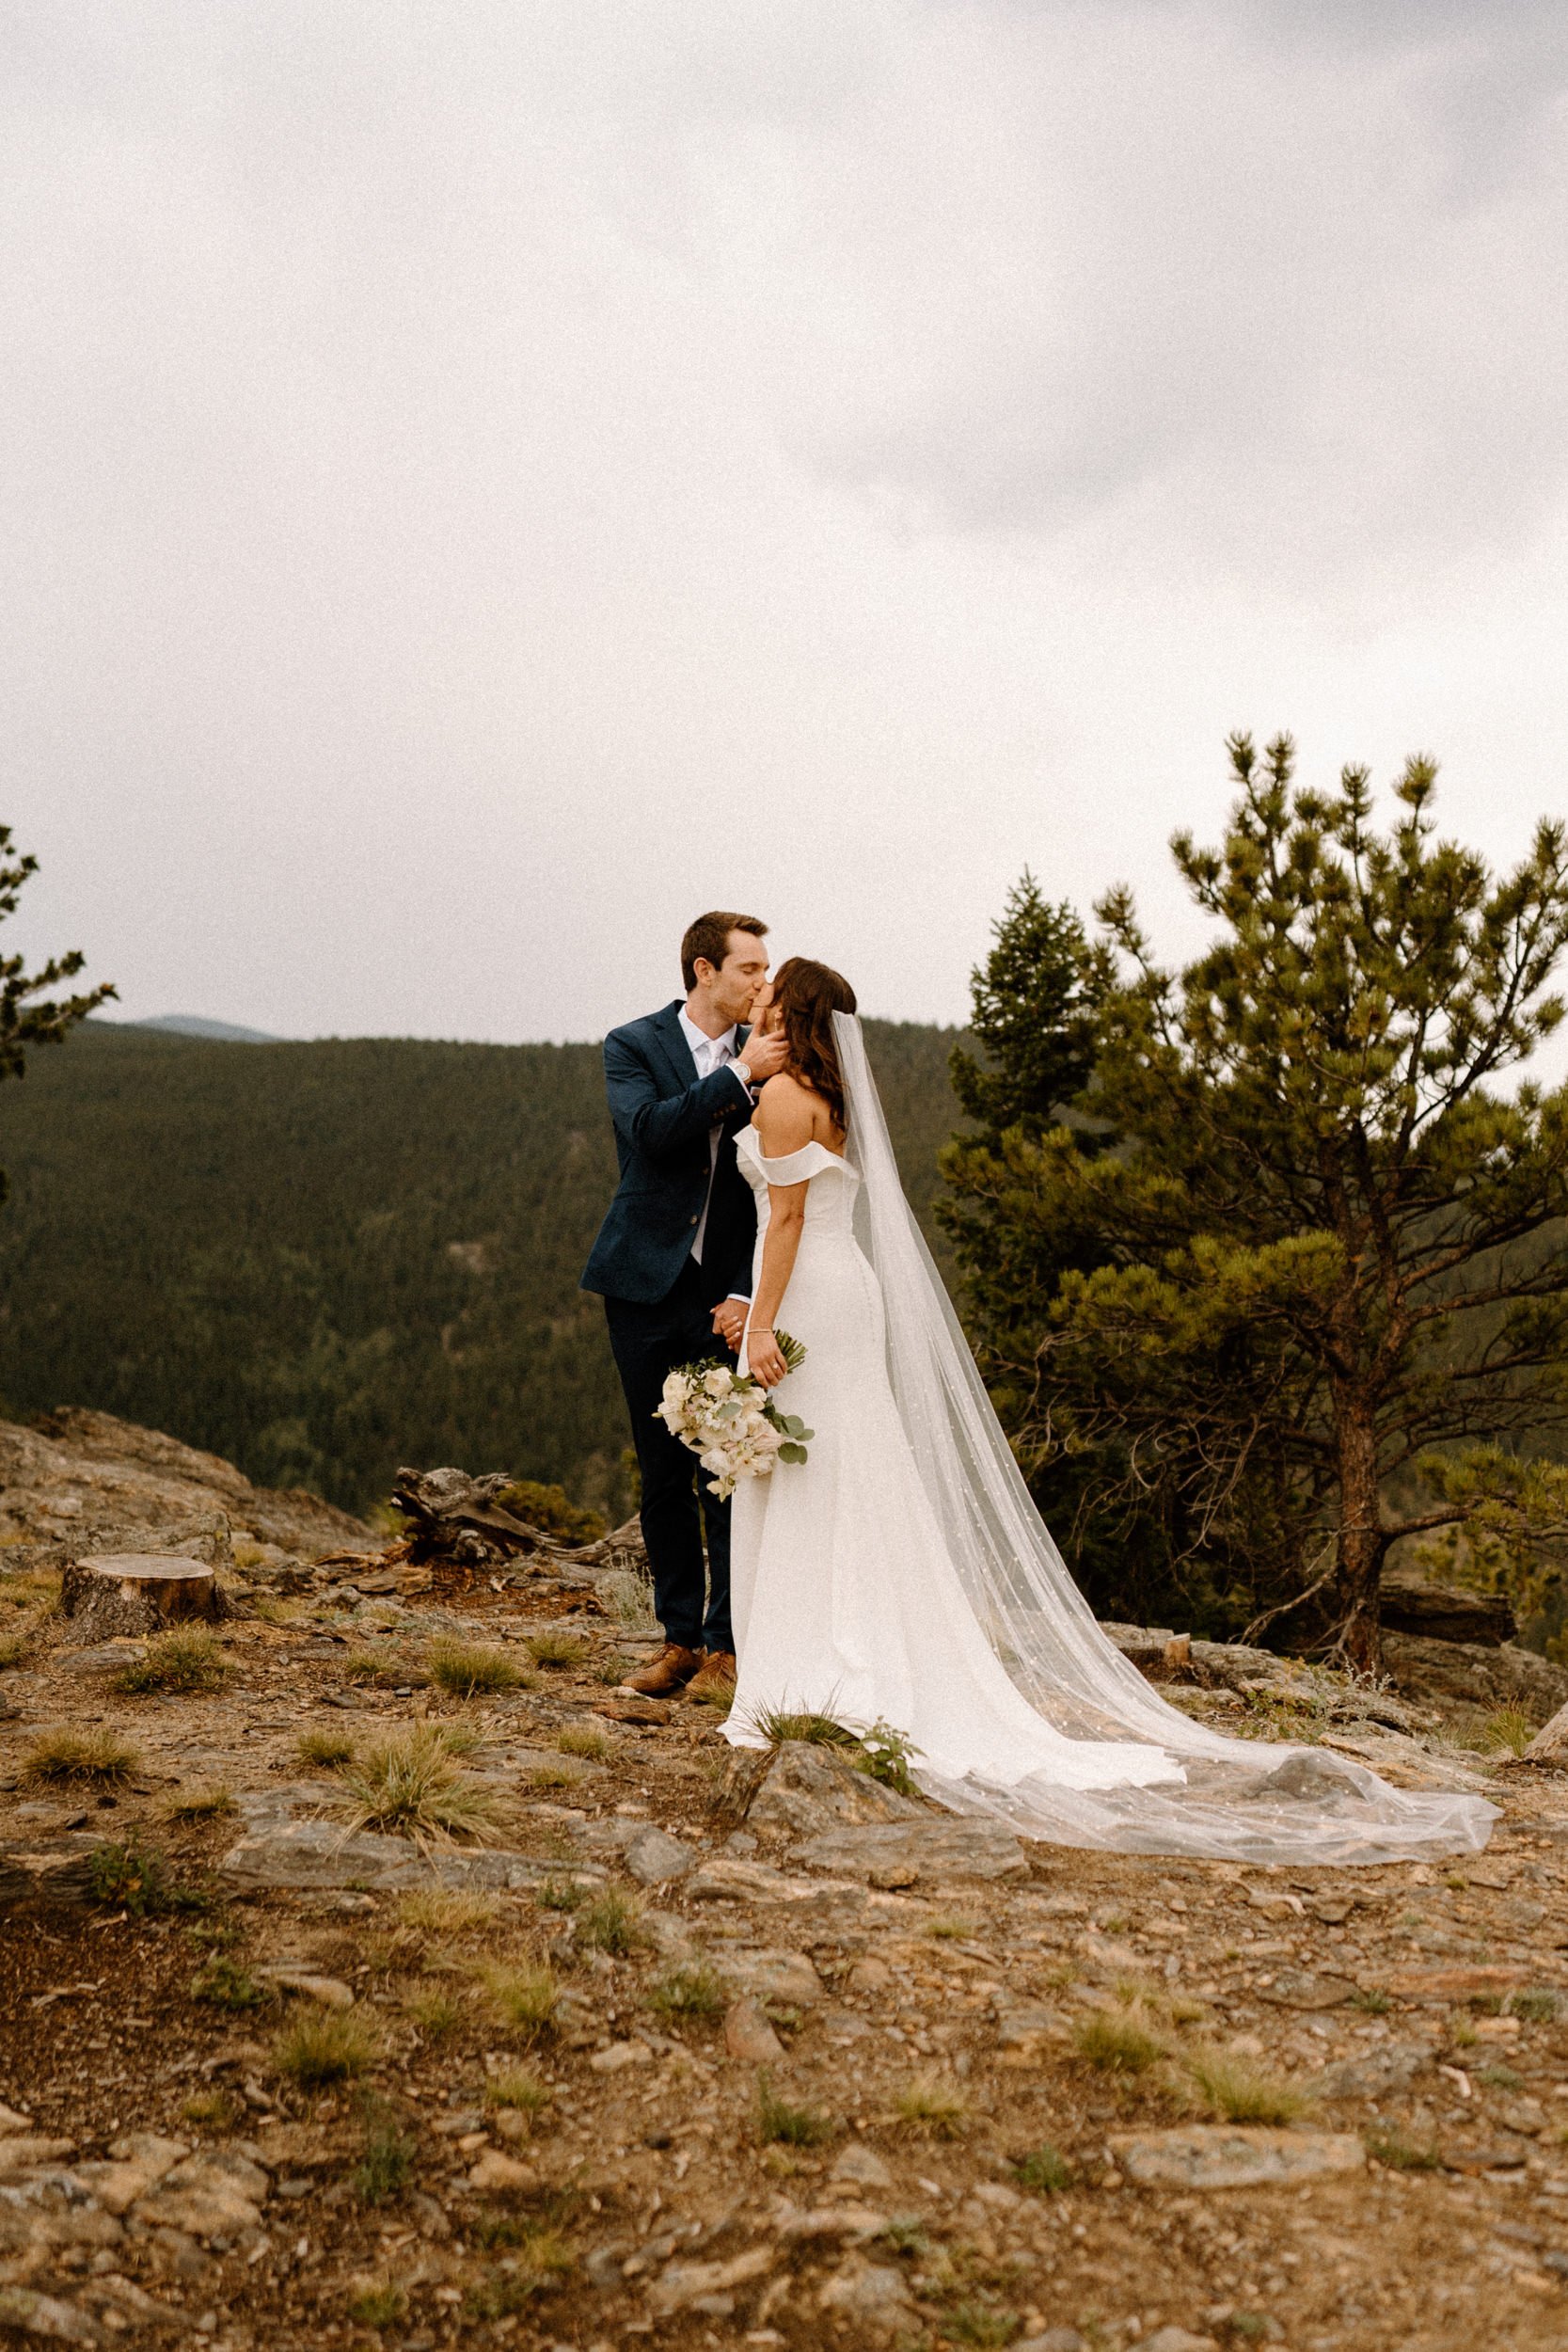 The bride and groom kiss on a mountain overlook at North Star Gatherings in Idaho Springs, CO